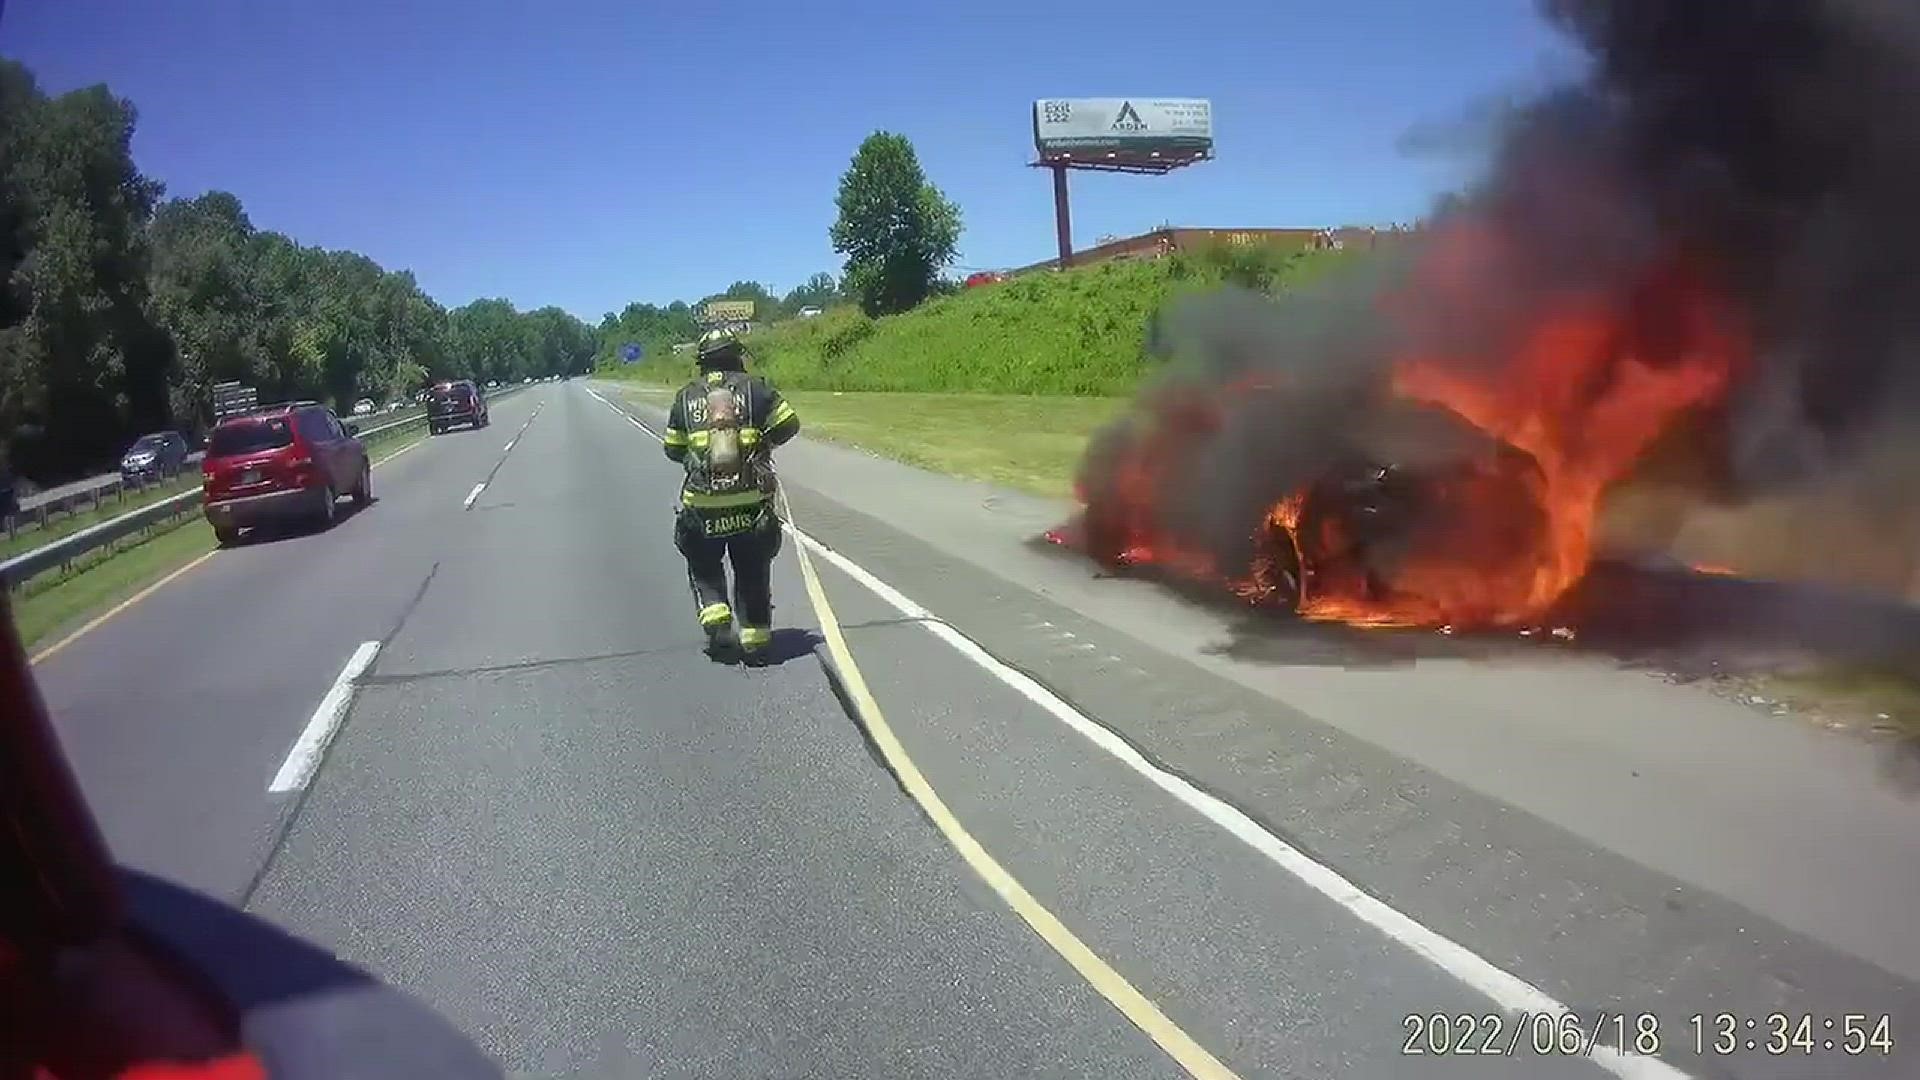 The Winston-Salem Fire Department tweeted a video of fire crews putting out a fire on Germanton Road Saturday afternoon.